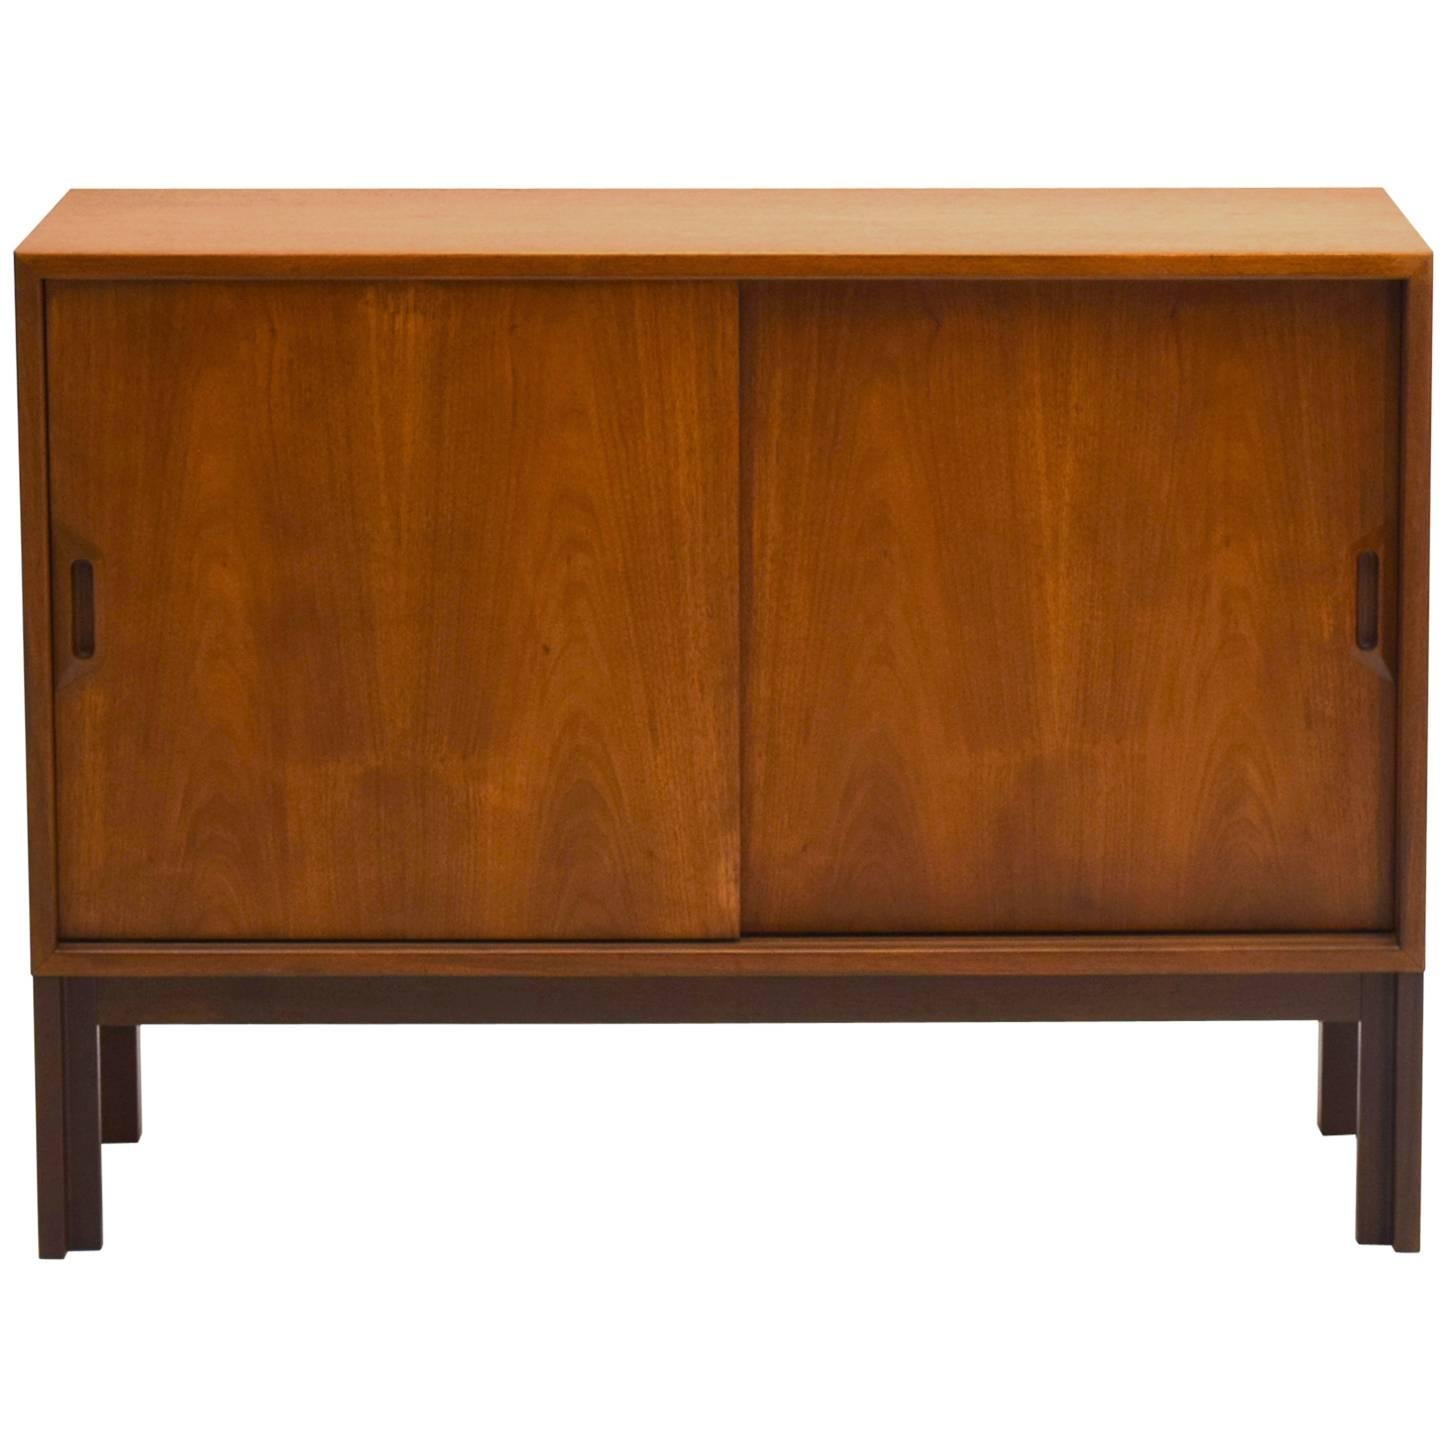 Thin Profile Sideboard in Teak and Rosewood Produced in Denmark